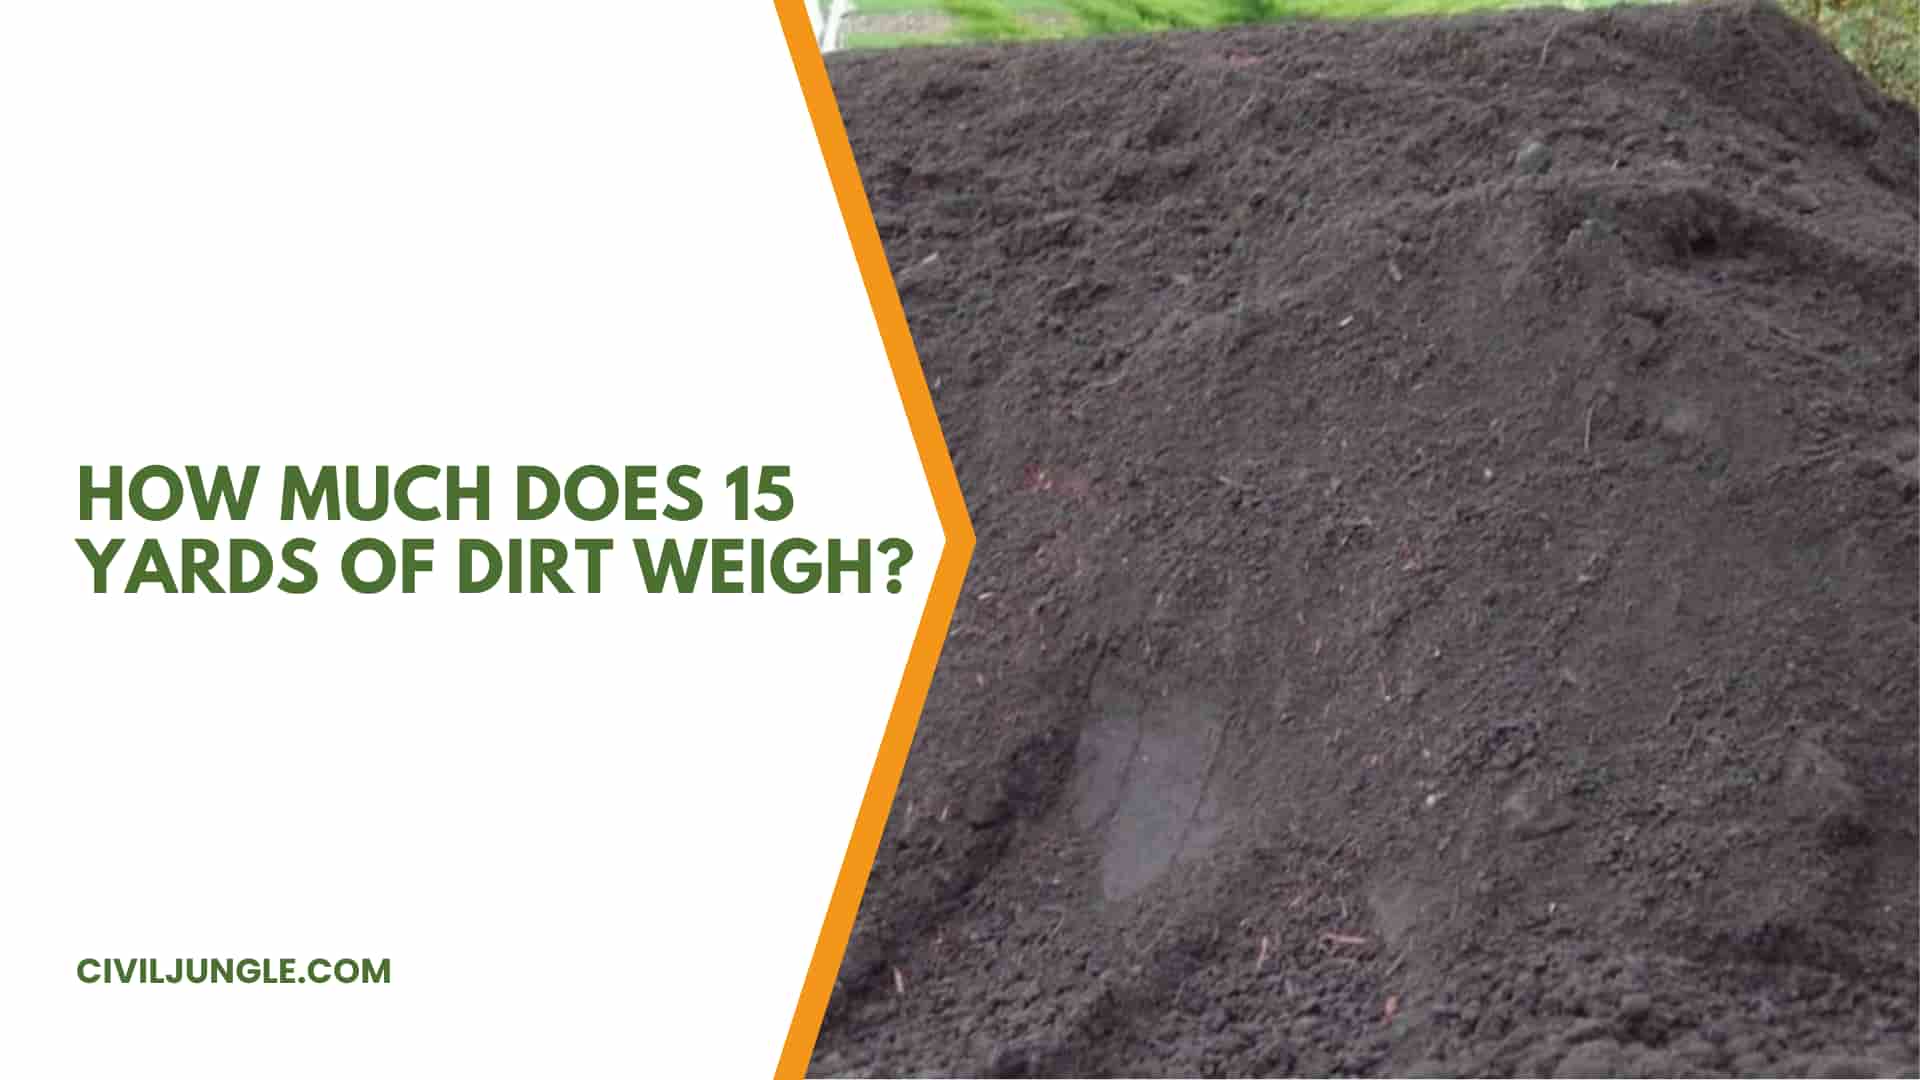 How Much Does 15 Yards of Dirt Weigh?